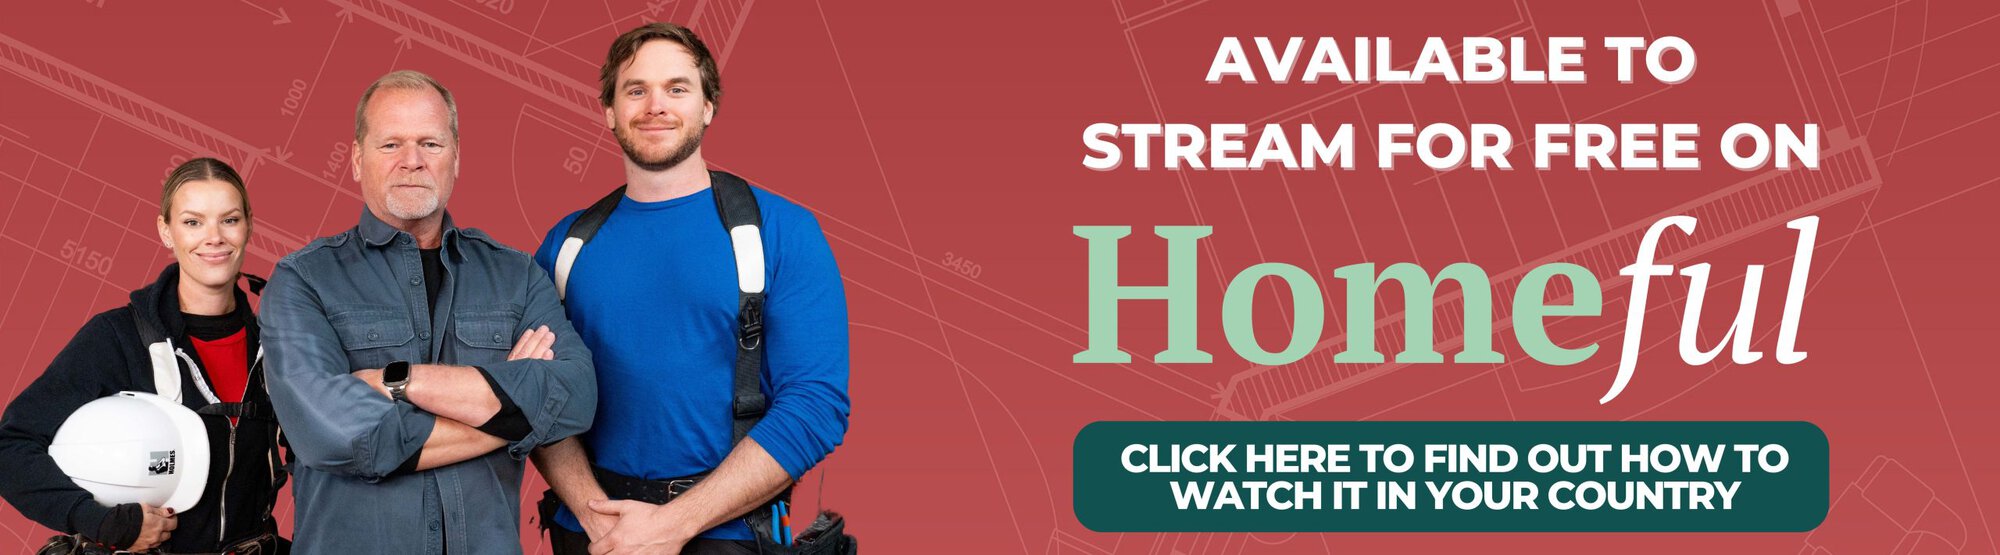 Watch Your Favourite Holmes Shows On Homeful TV